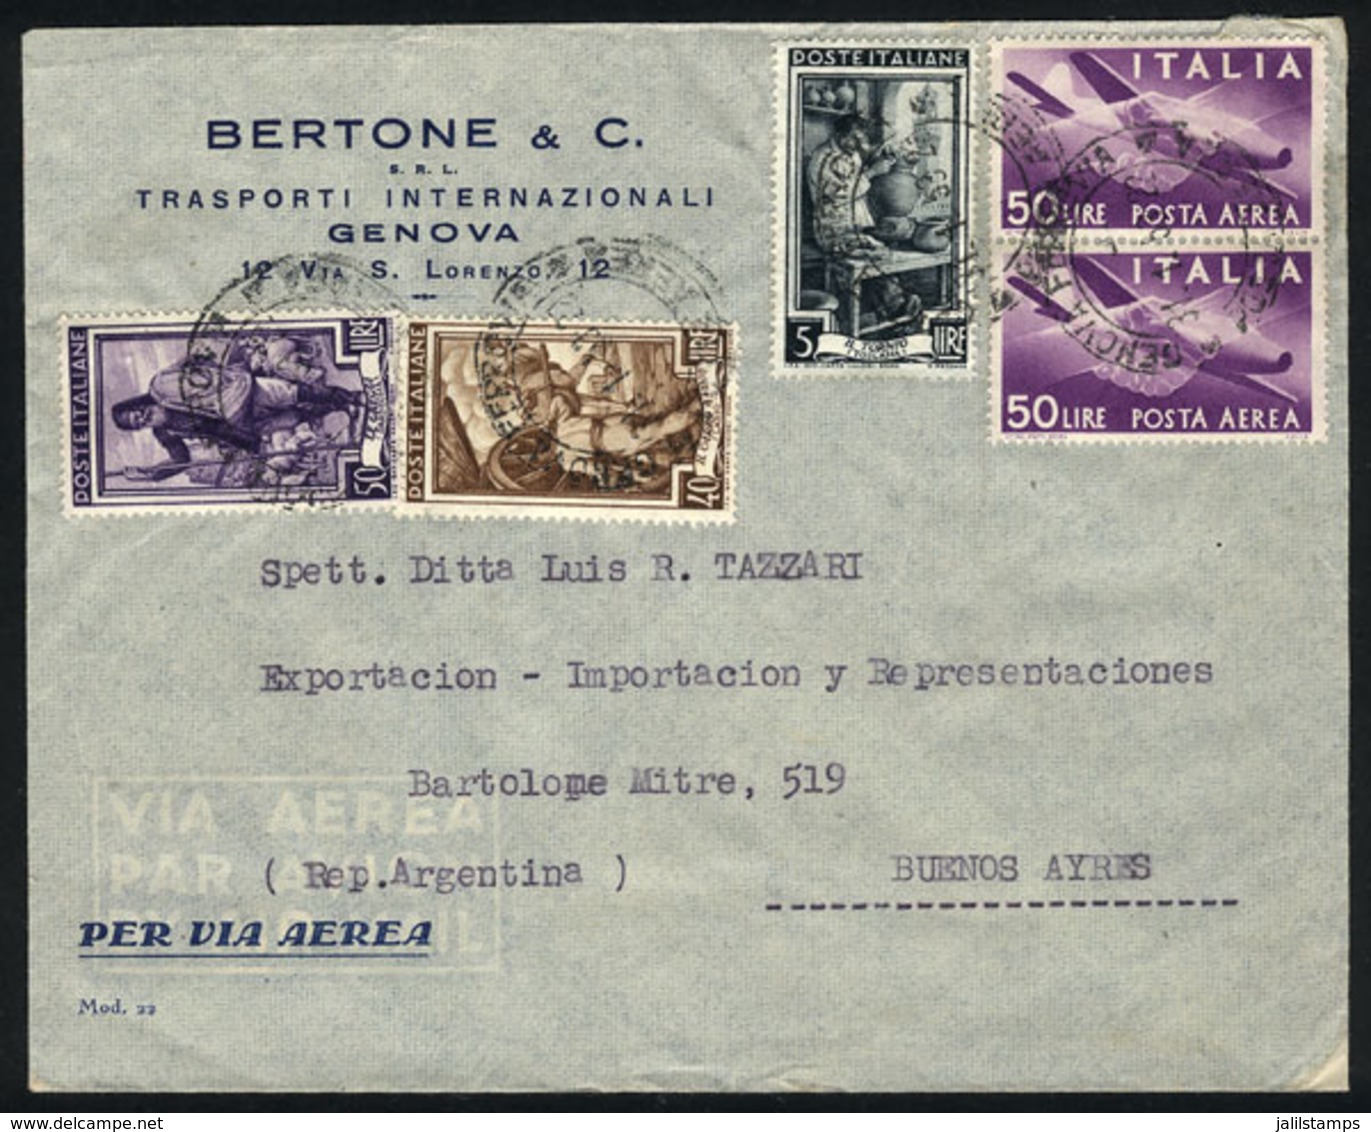 ITALY: Airmail Cover Sent From Genova To Argentina On 31/JA/1953, With Nice Postage Of 195L., VF Quality! - Non Classés